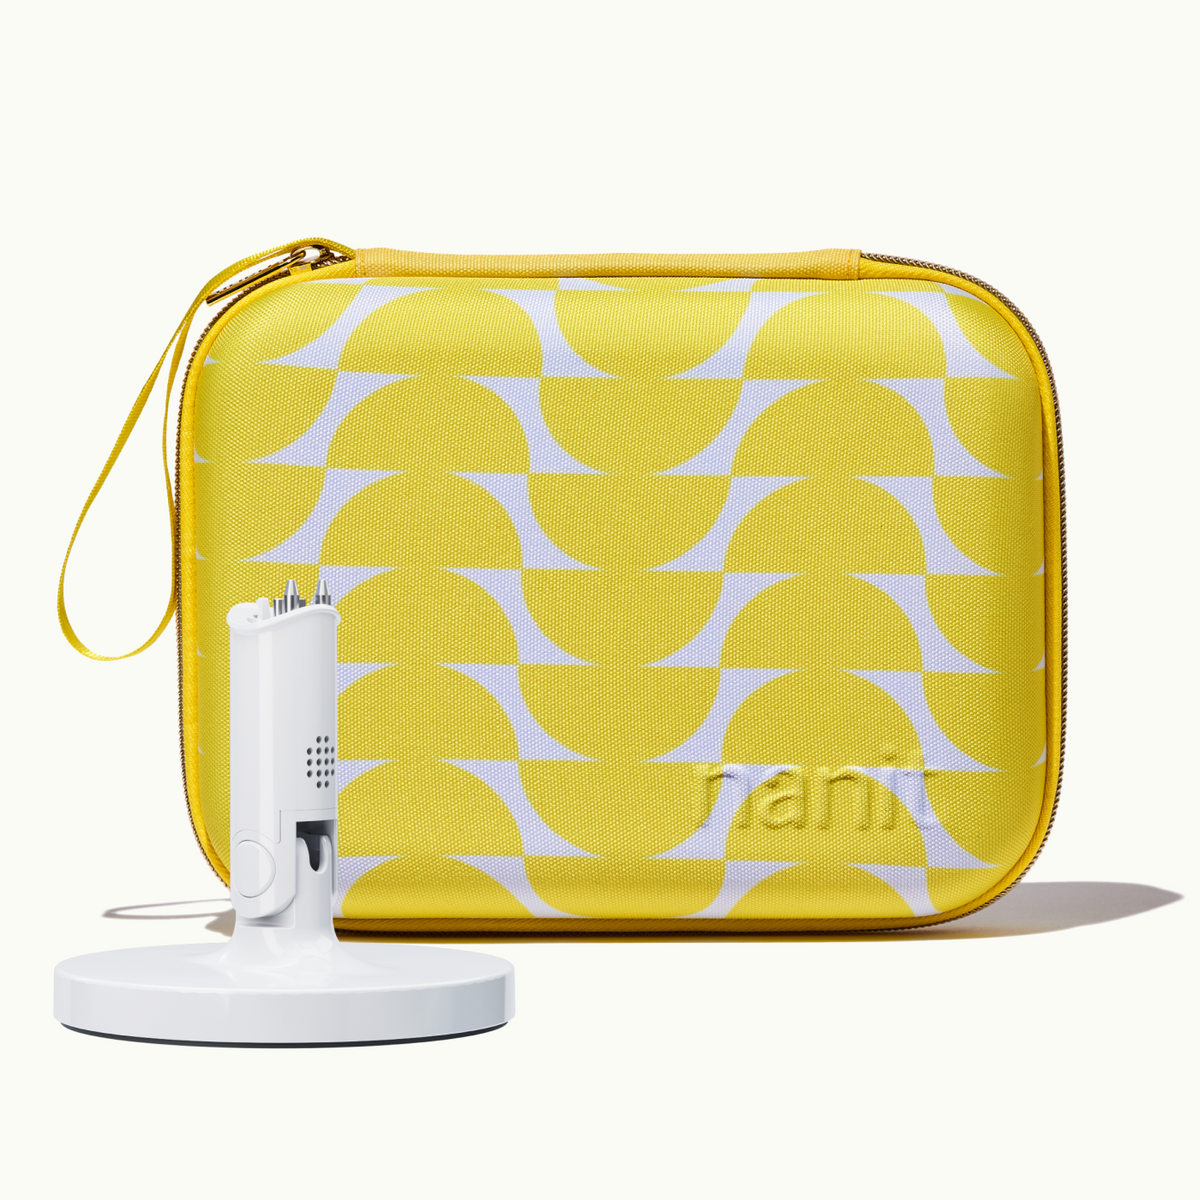 nanit flex stand and nanit yellow travel case #color_yellow